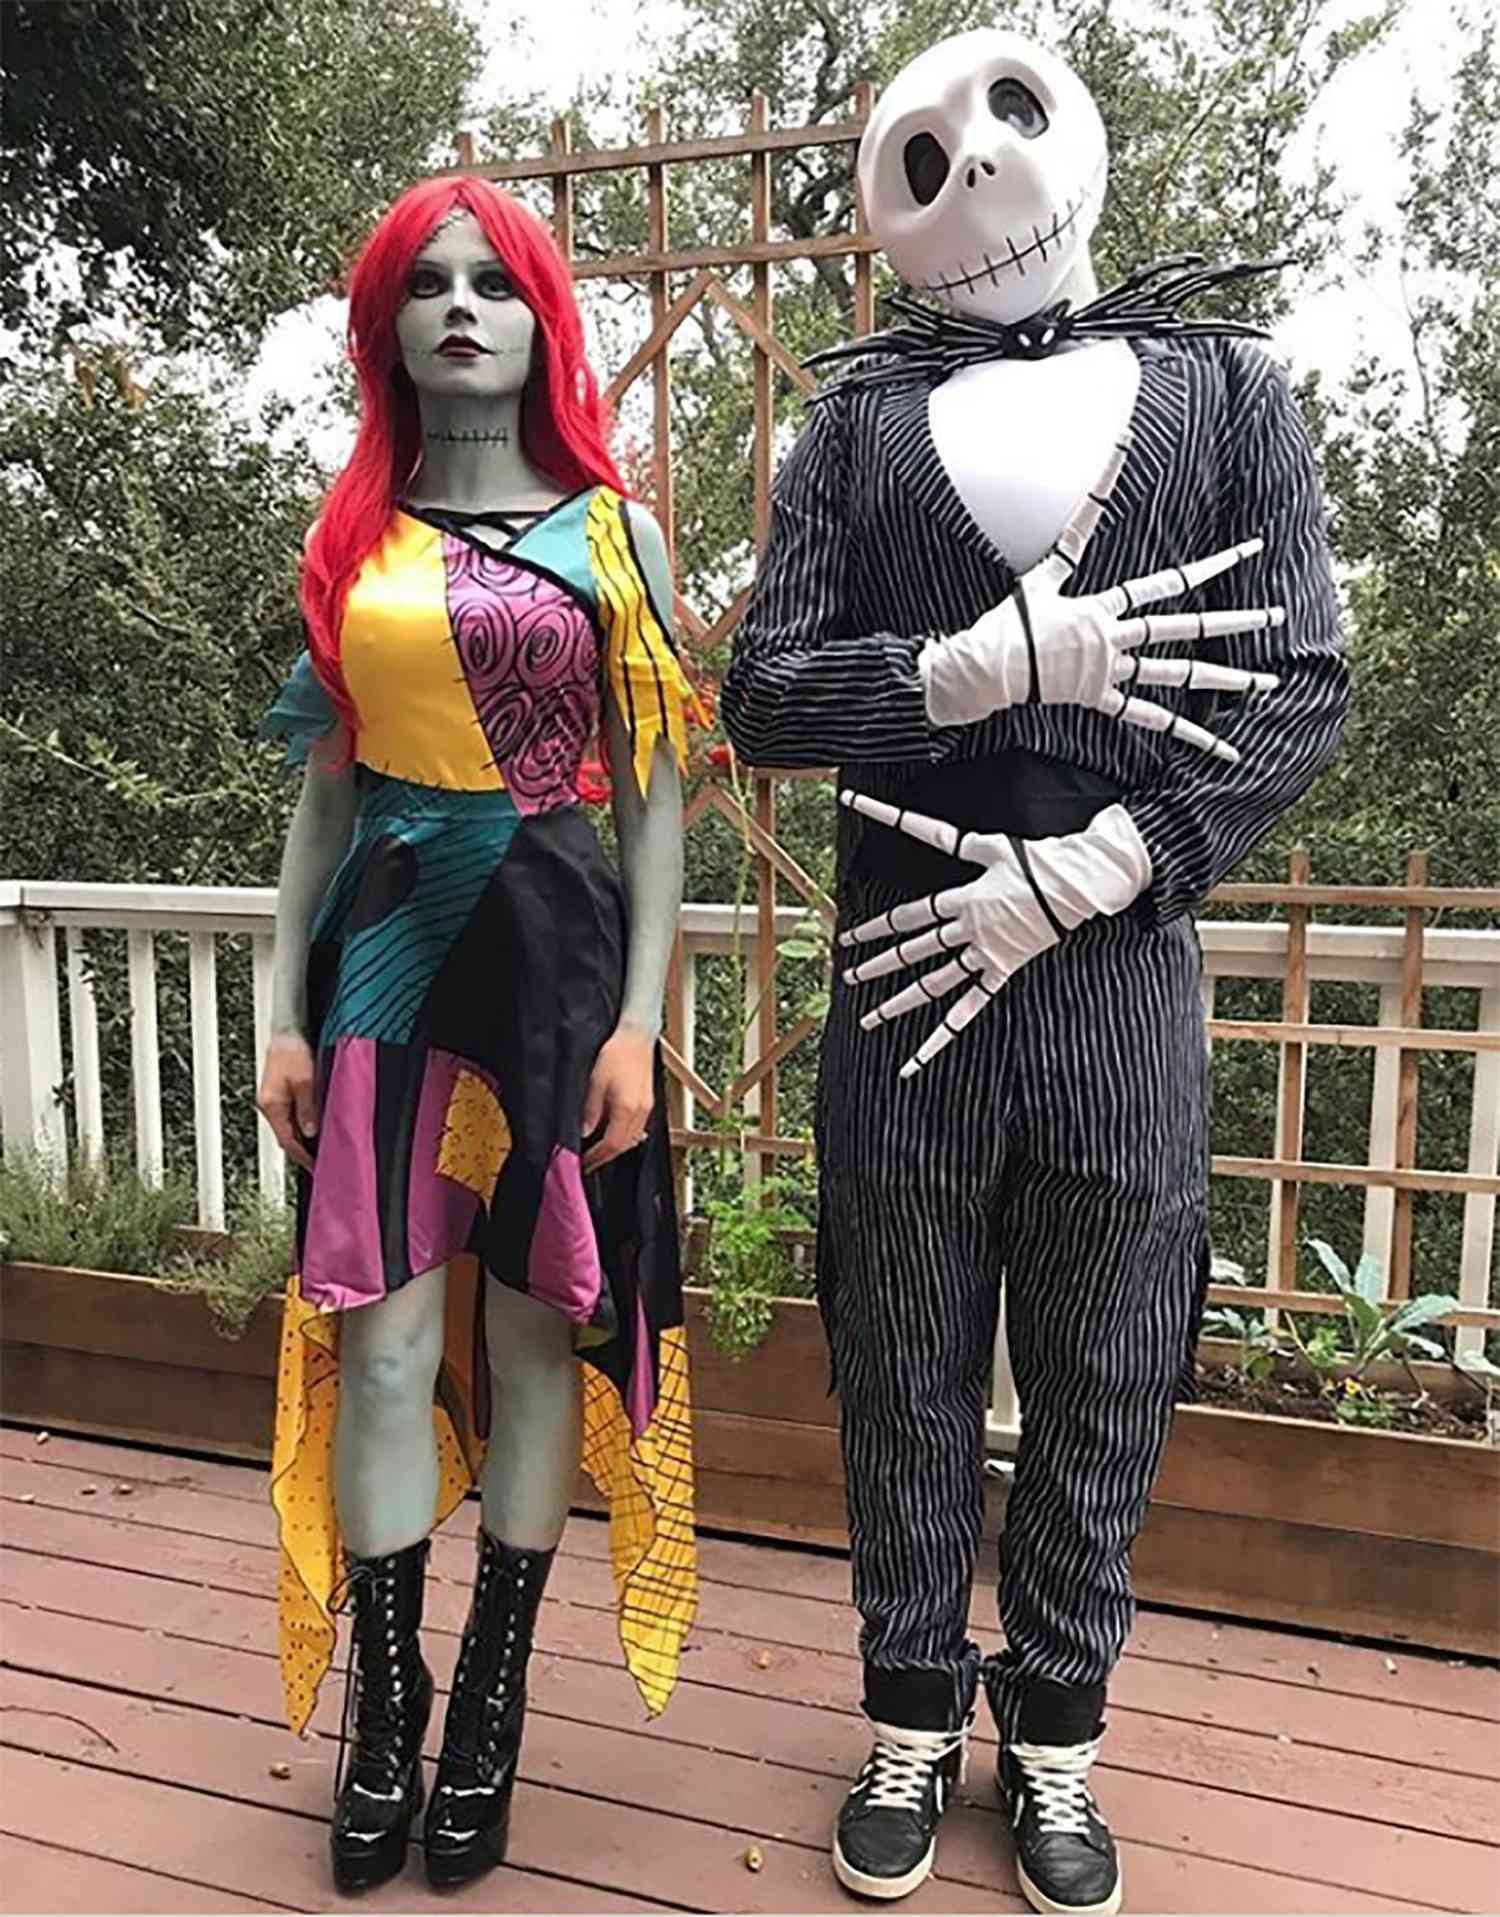 Jenna Dewan and Channing Tatum as Sally and Jack